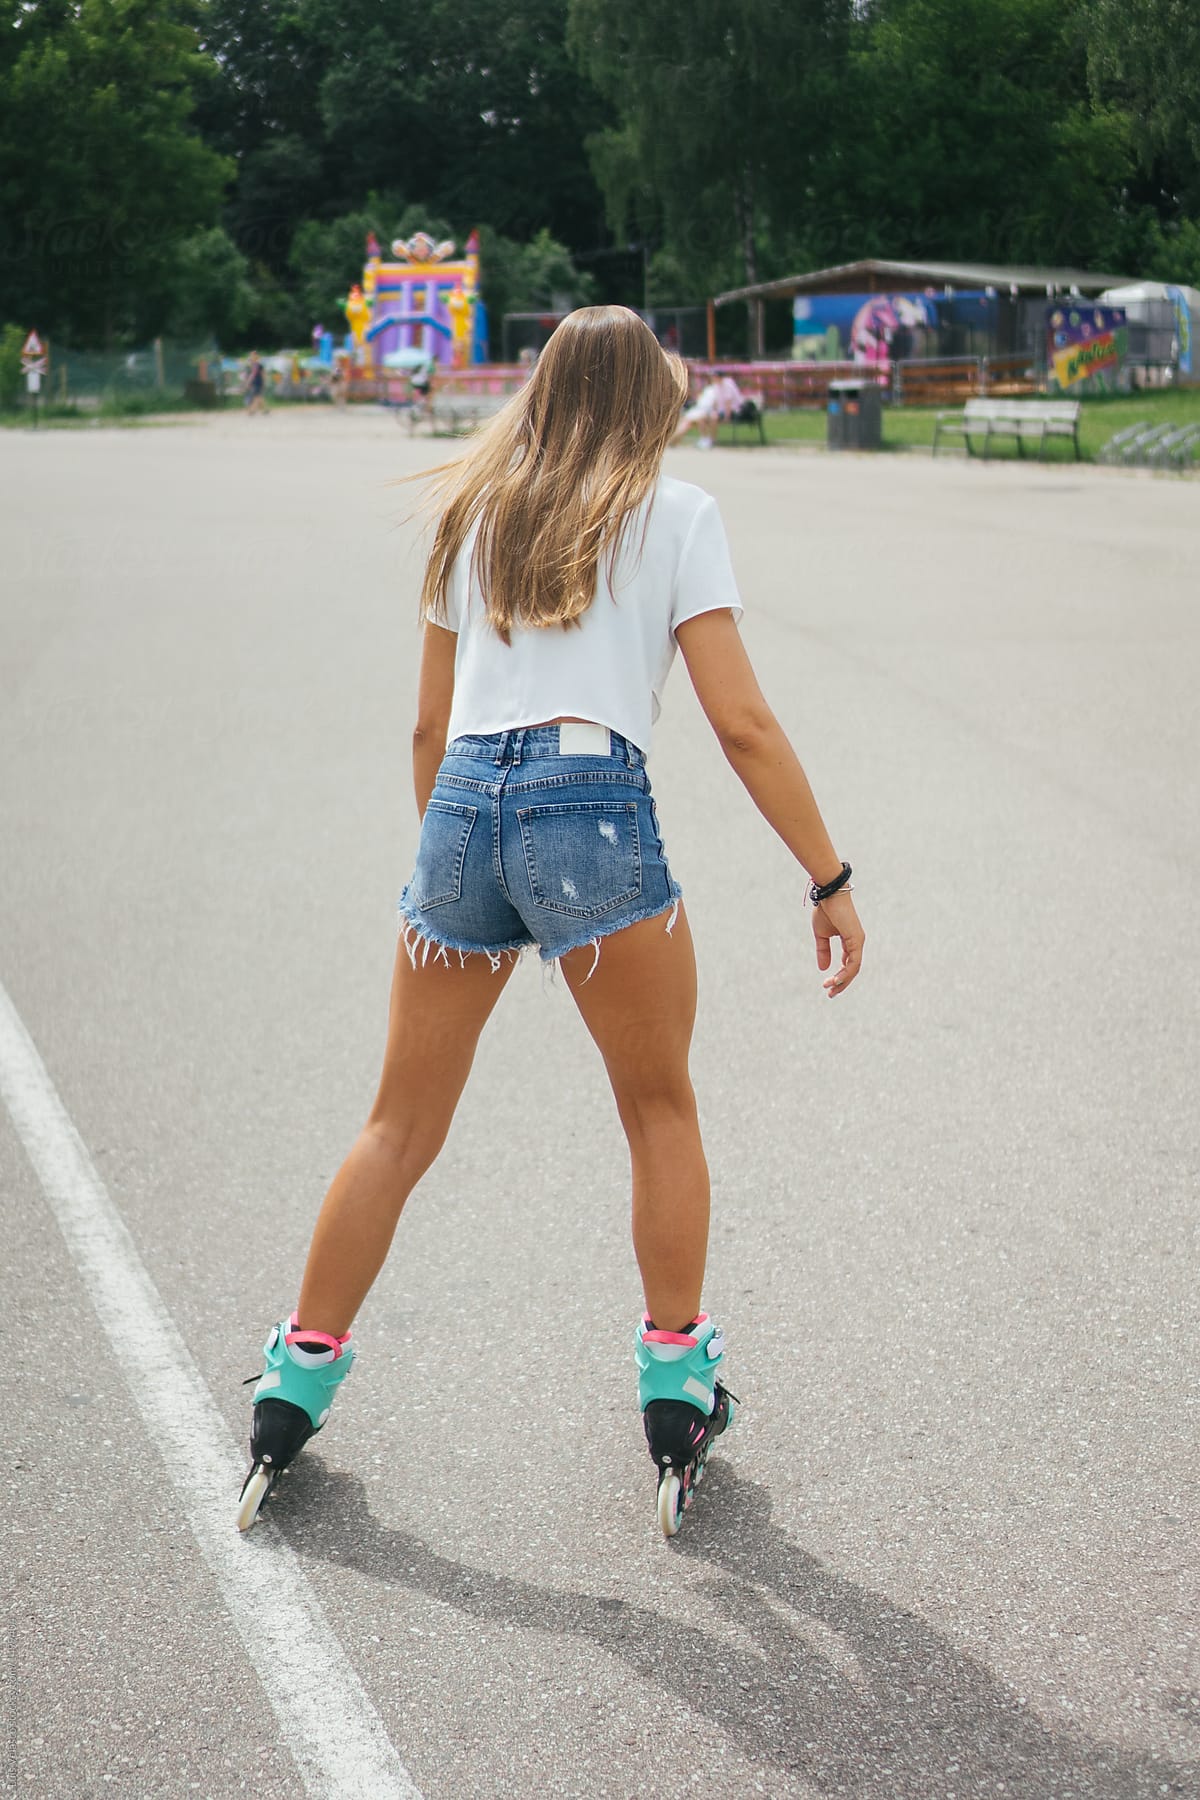 Young Woman On Roller Skates.